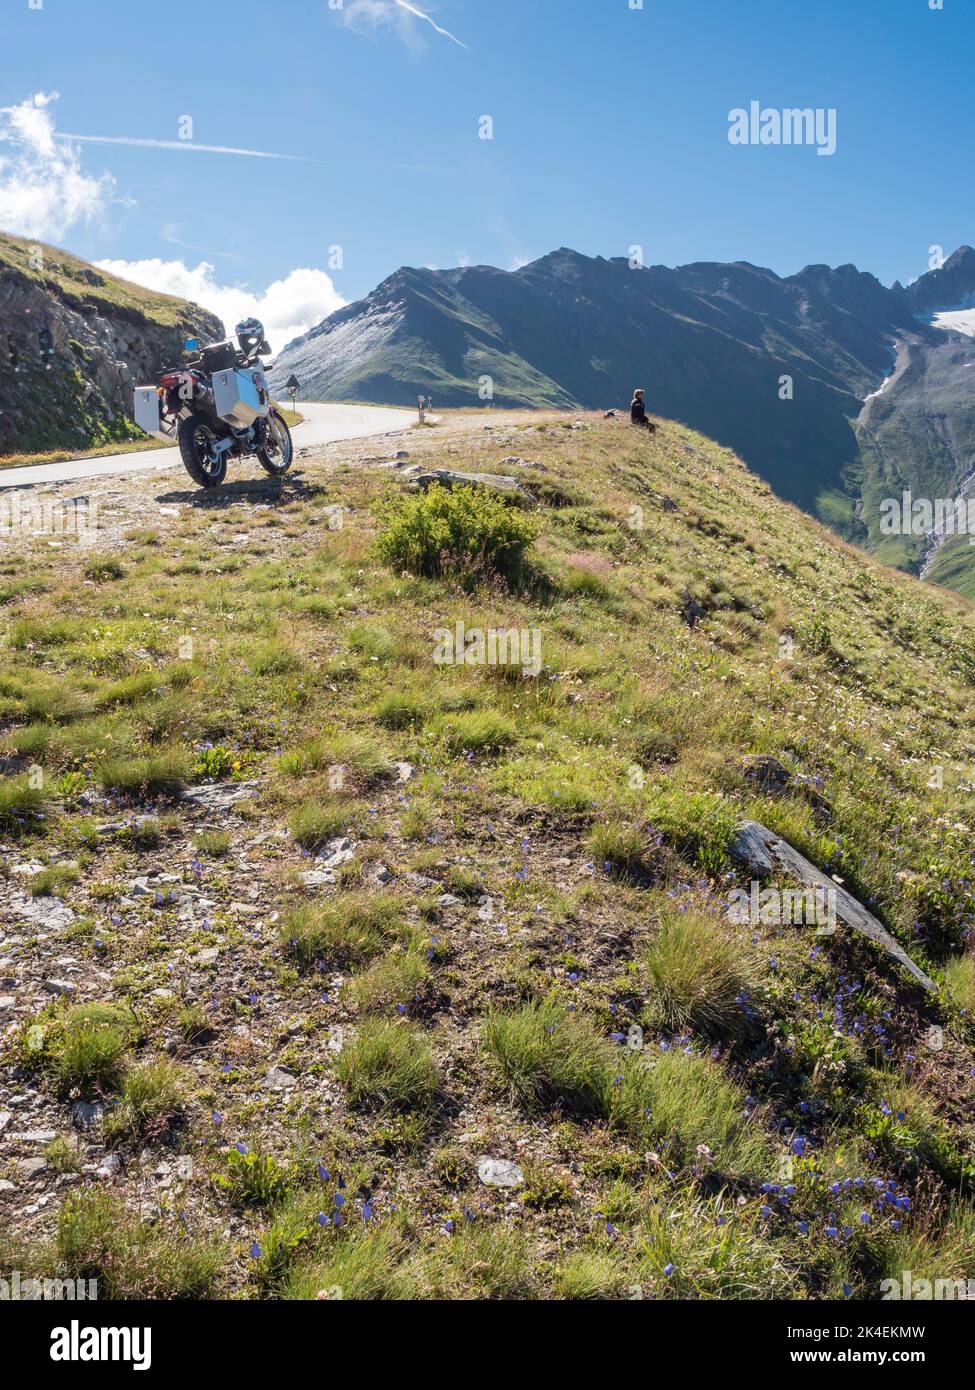 An adventure motorcycle with big aluminum cases is parked at a mountain pass in the European alps. Rear view, low angle view Stock Photo